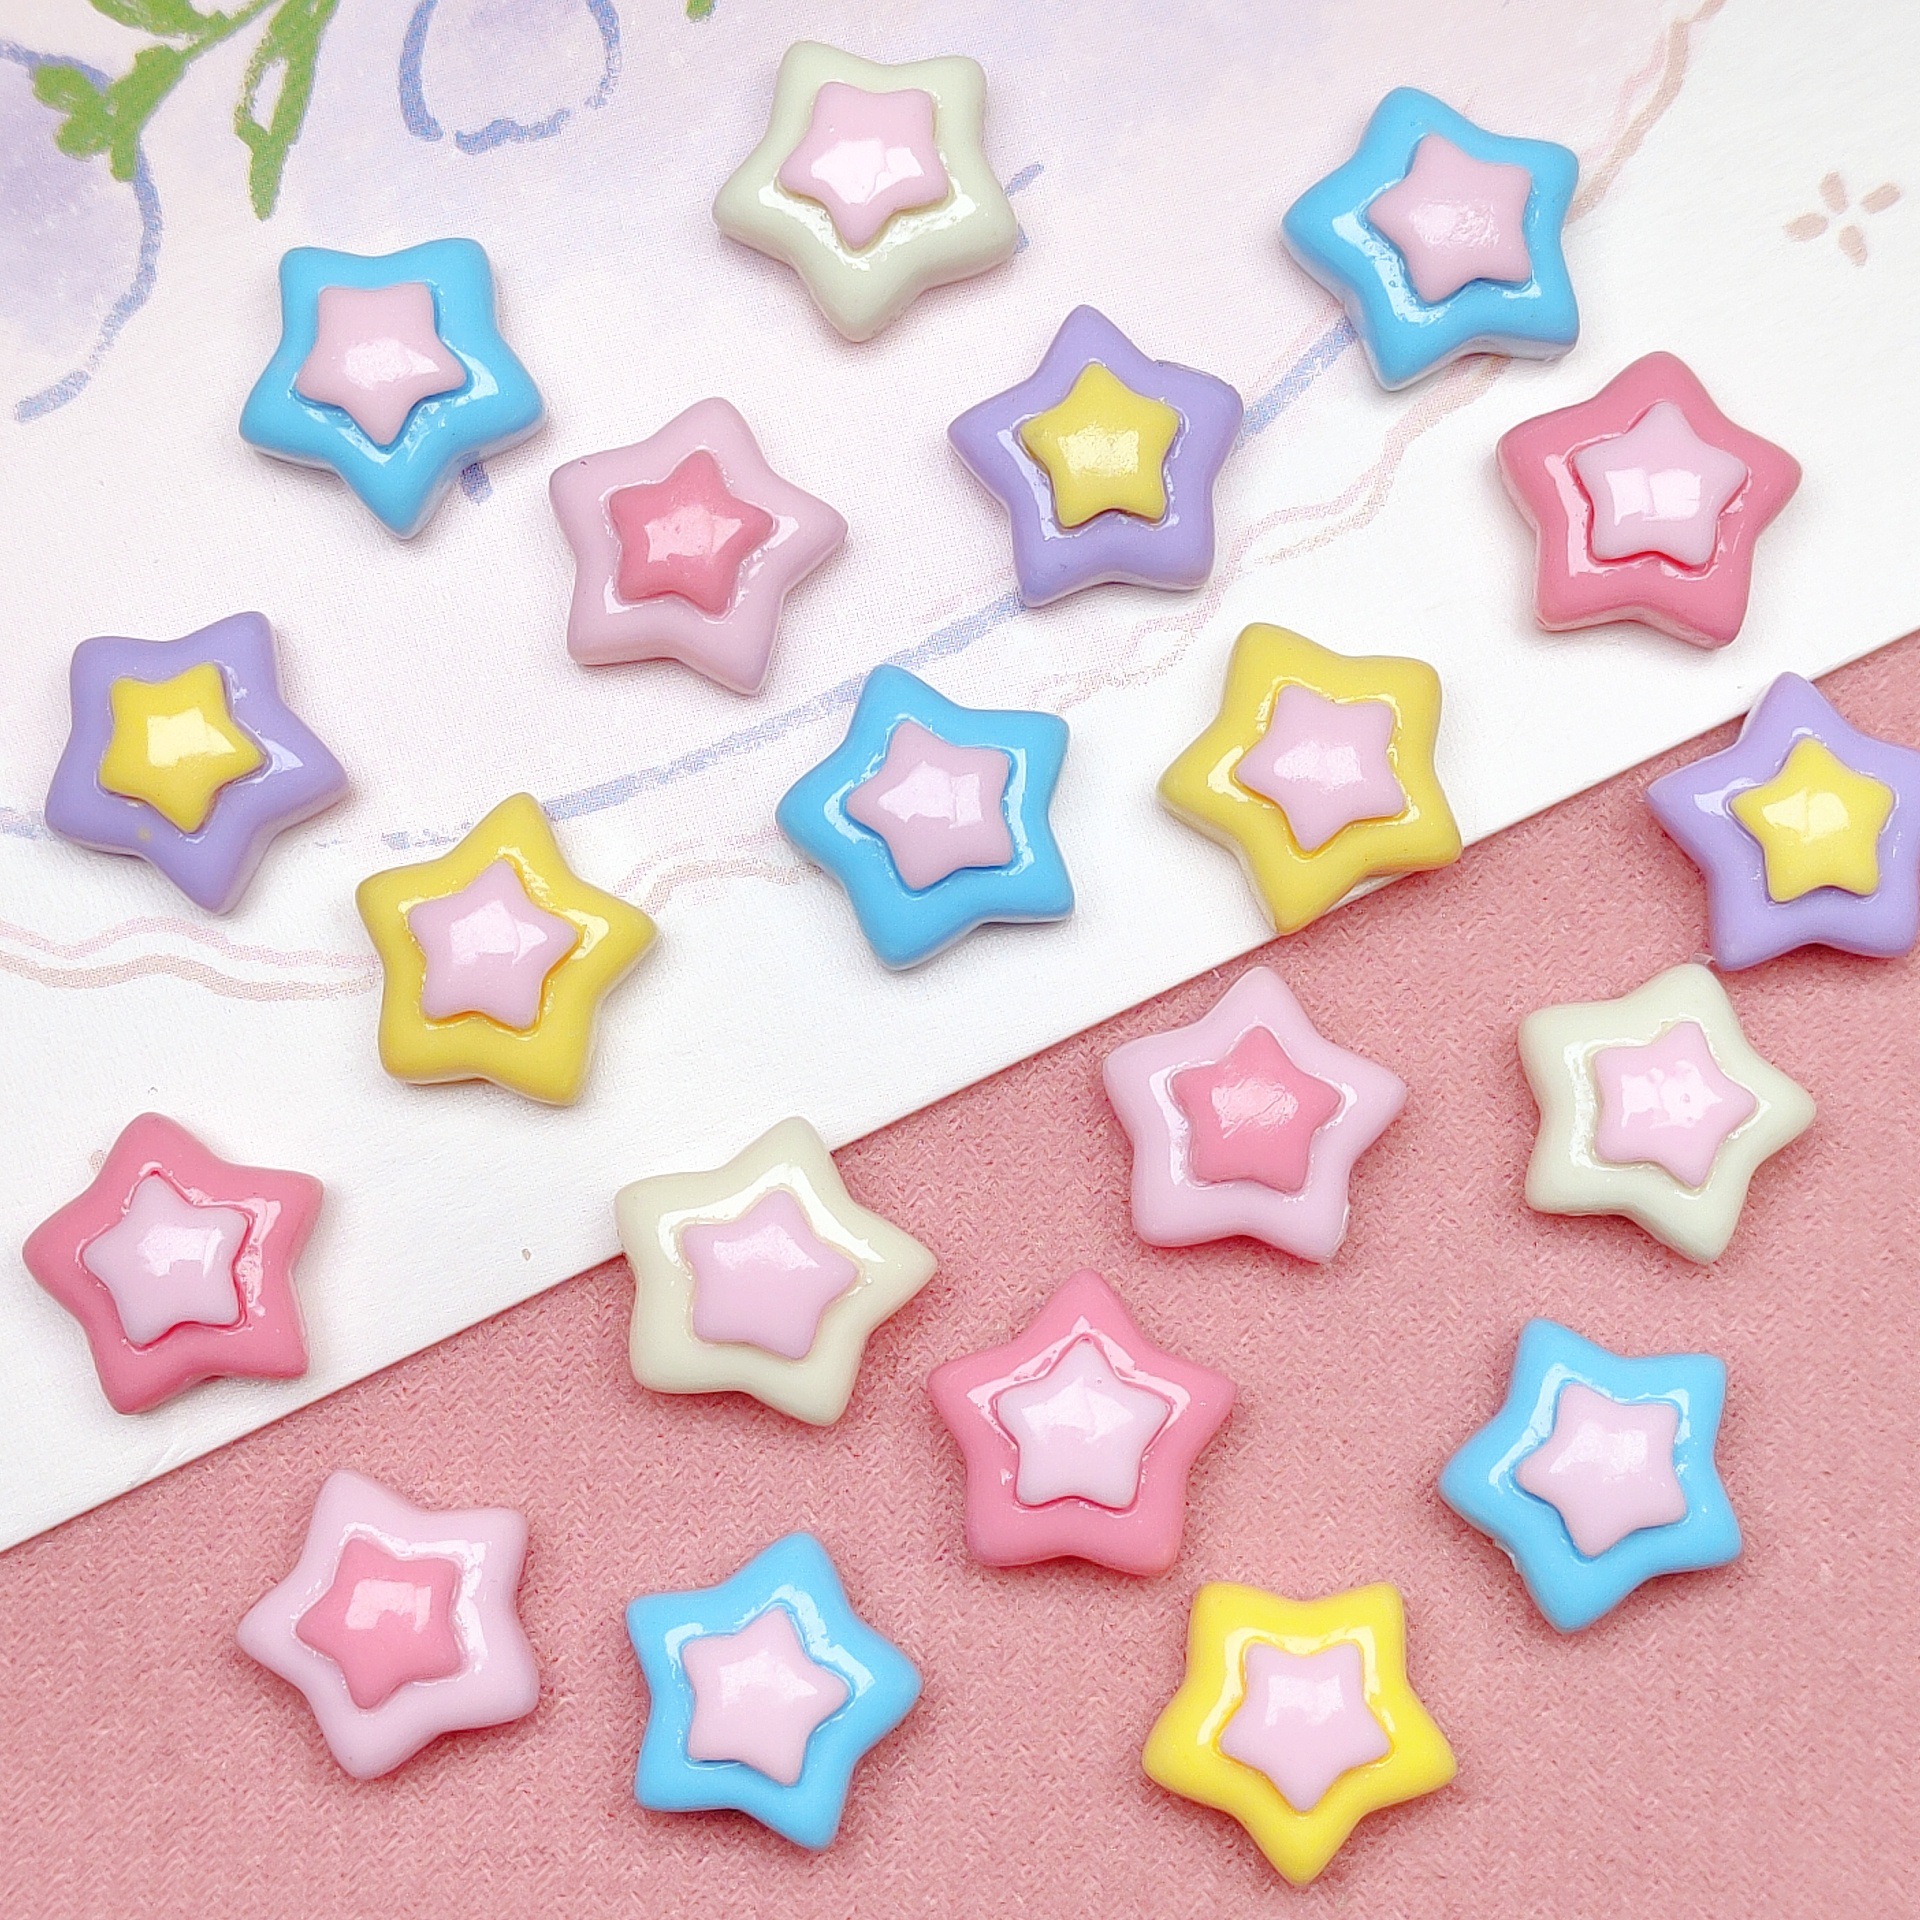 13mm Mini Five-Pointed Star DIY Cream Phone Case Resin Accessories Handmade Hair Clips Hairband Jewelry Material Package